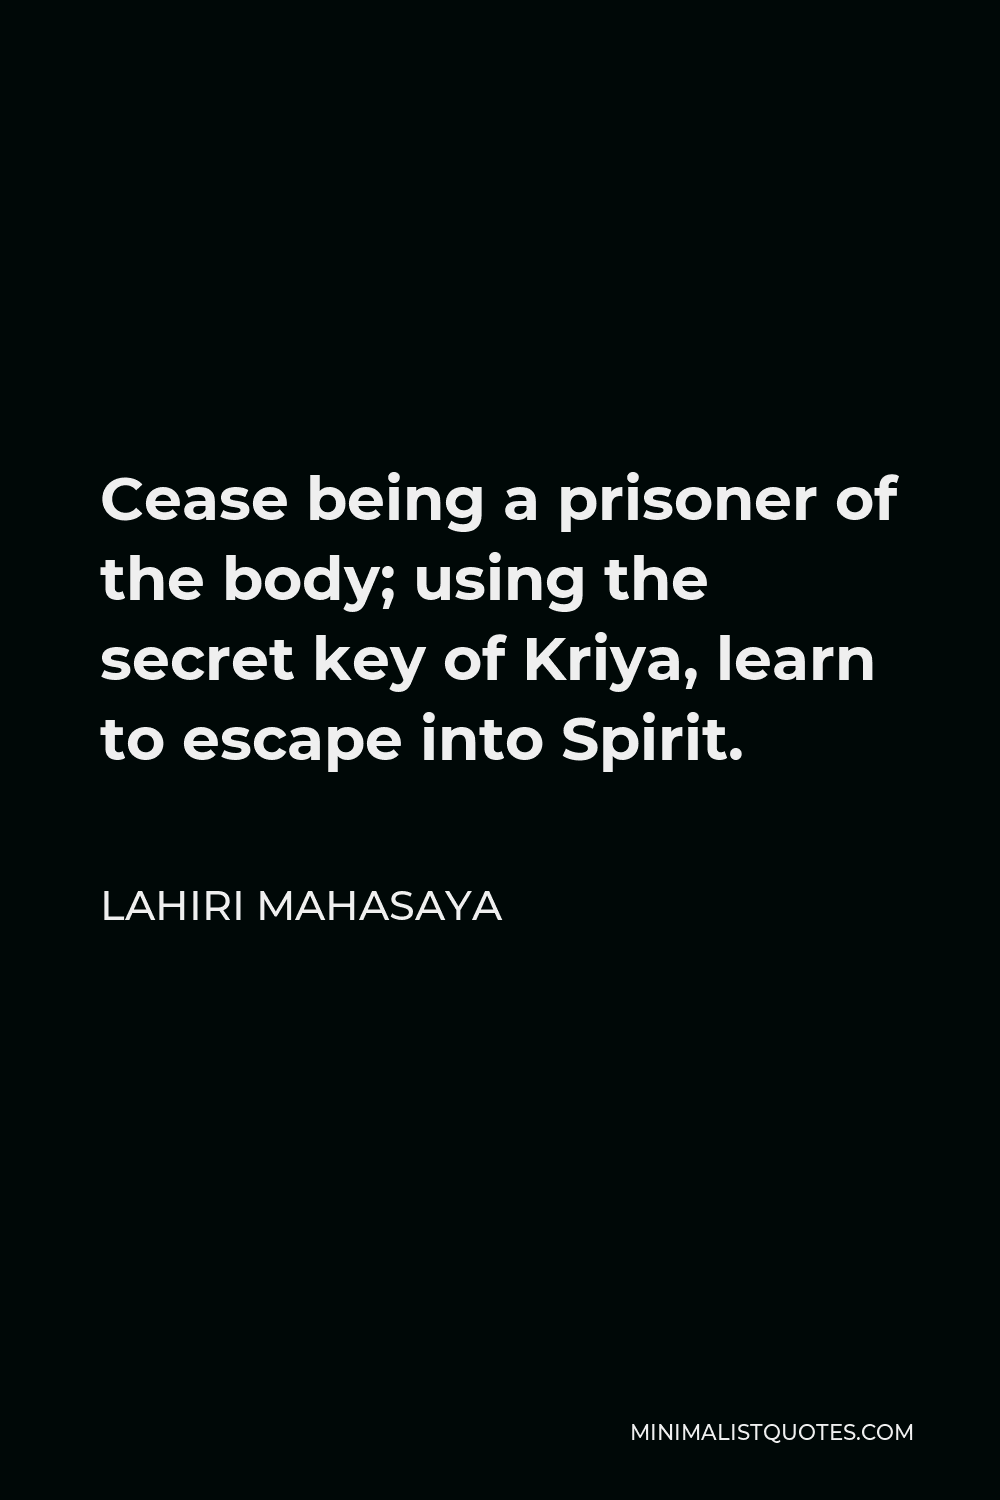 Lahiri Mahasaya Quote - Cease being a prisoner of the body; using the secret key of Kriya, learn to escape into Spirit.